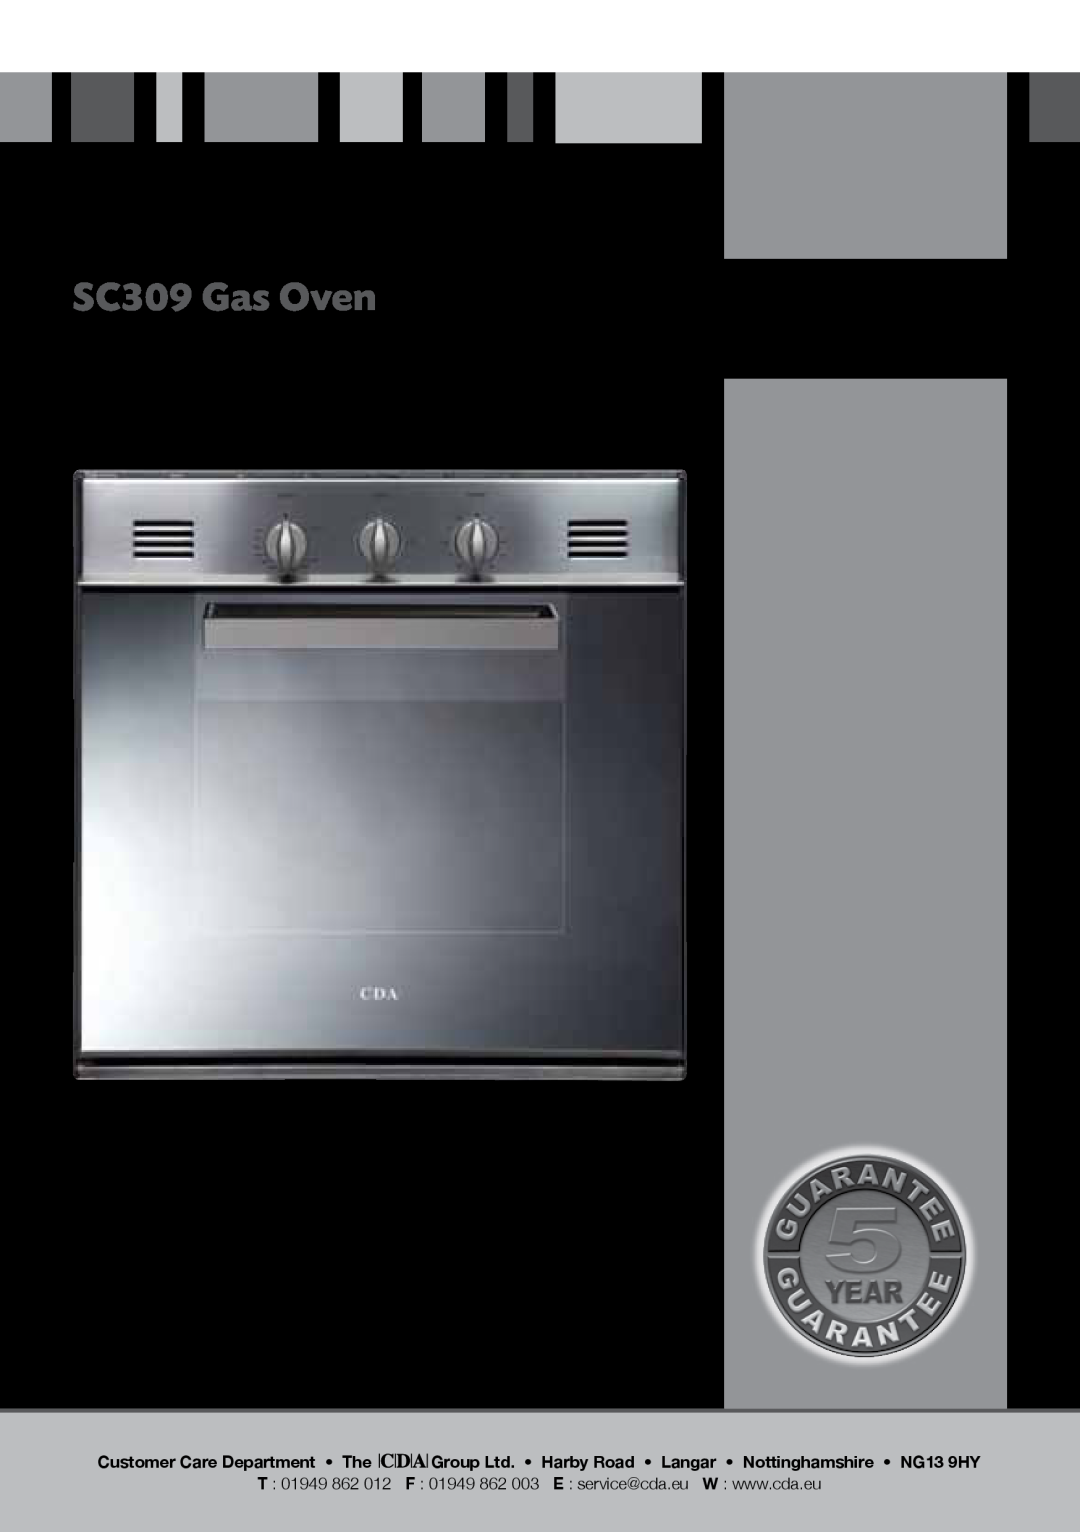 CDA manual SC309 Gas Oven, Manual for Installation, Use and Maintenance 